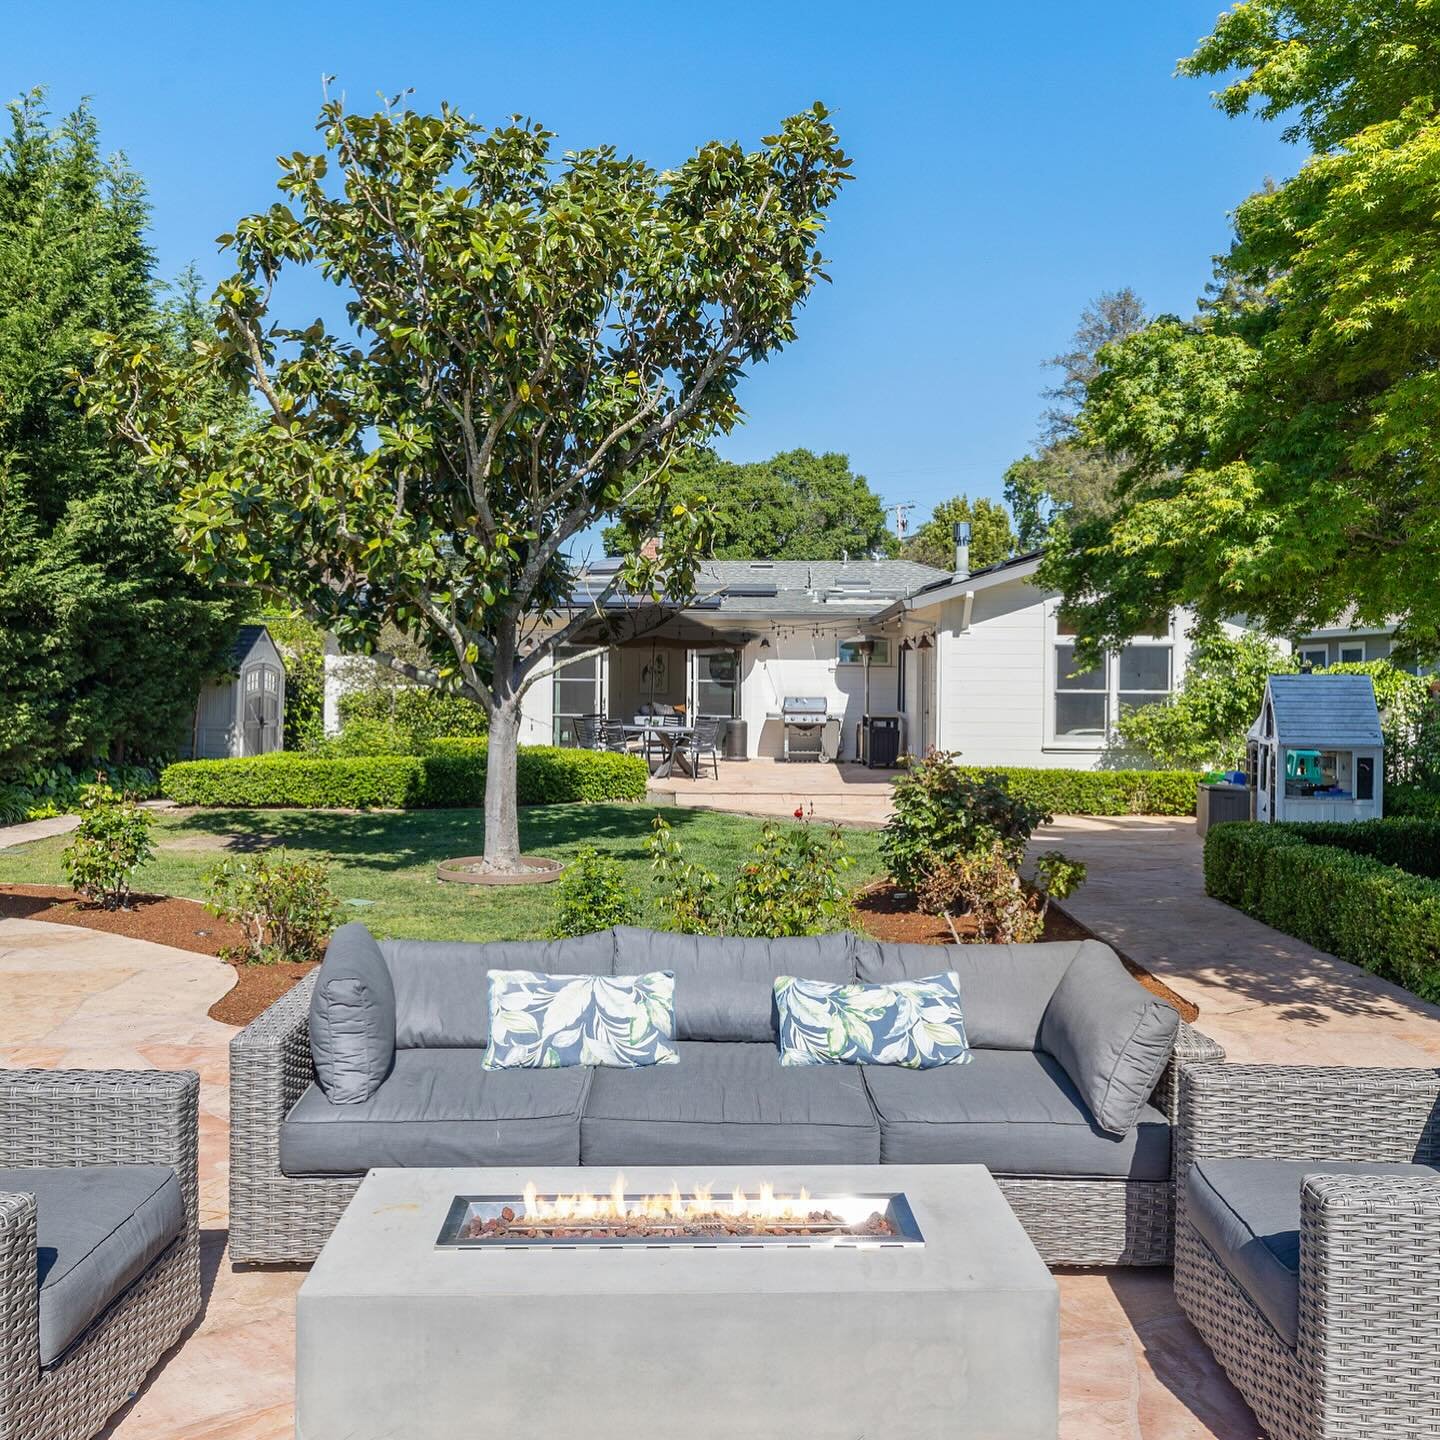 Welcome to 43 McAllister Ave, a single-level remodeled stunner in the heart of sought-after Kentfield Gardens! 

Walkable to award-winning schools, this 4-bed, 2-bath home includes a detached studio and offers luxury, charm, and endless possibilities